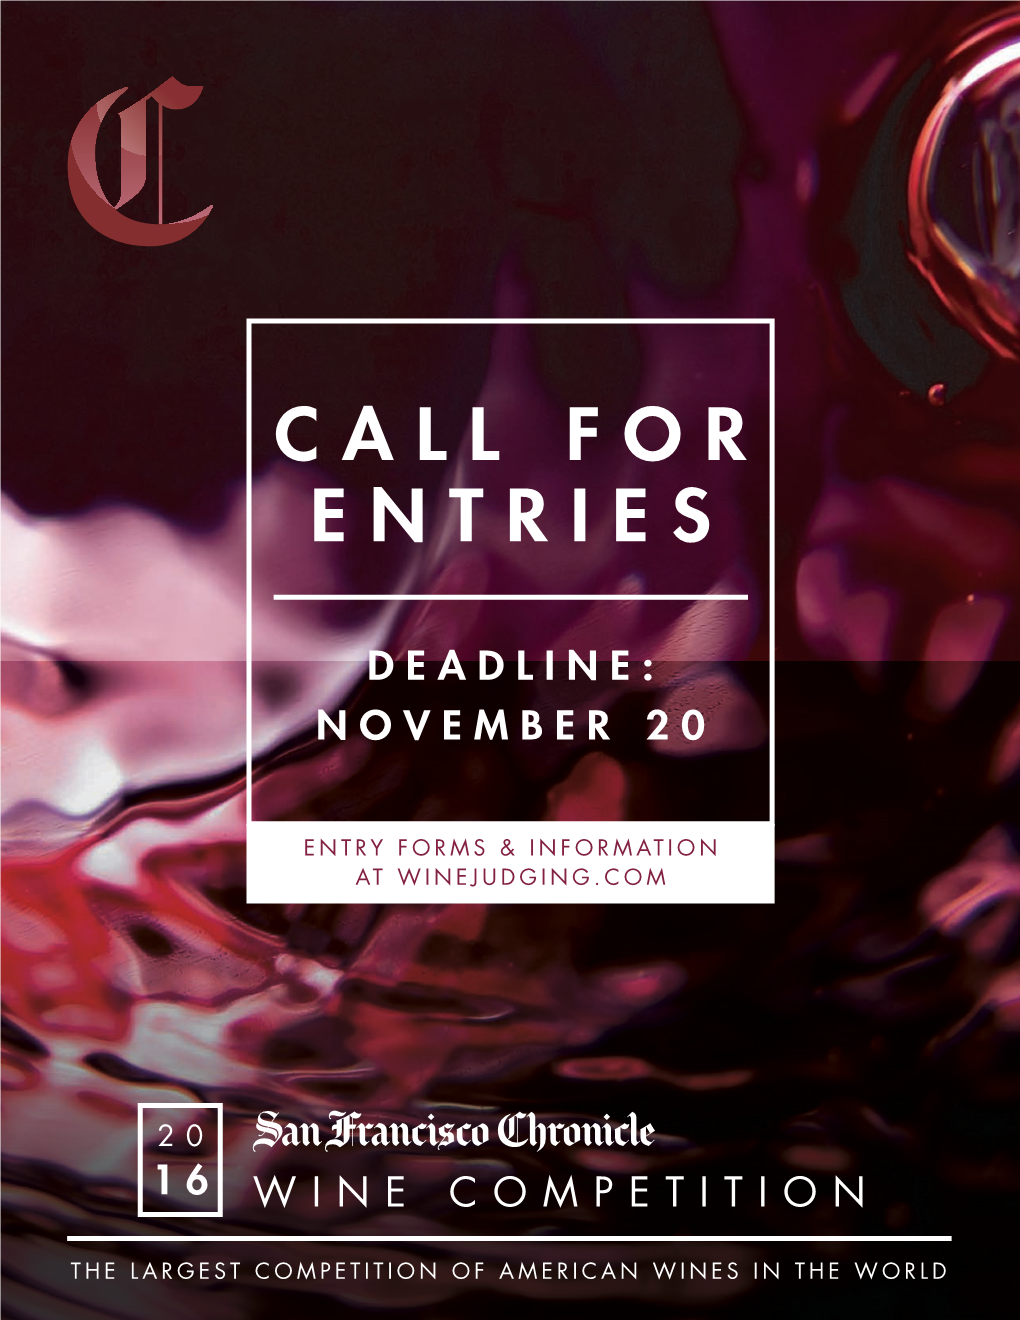 Call for Entries” for Its 2016 Competition